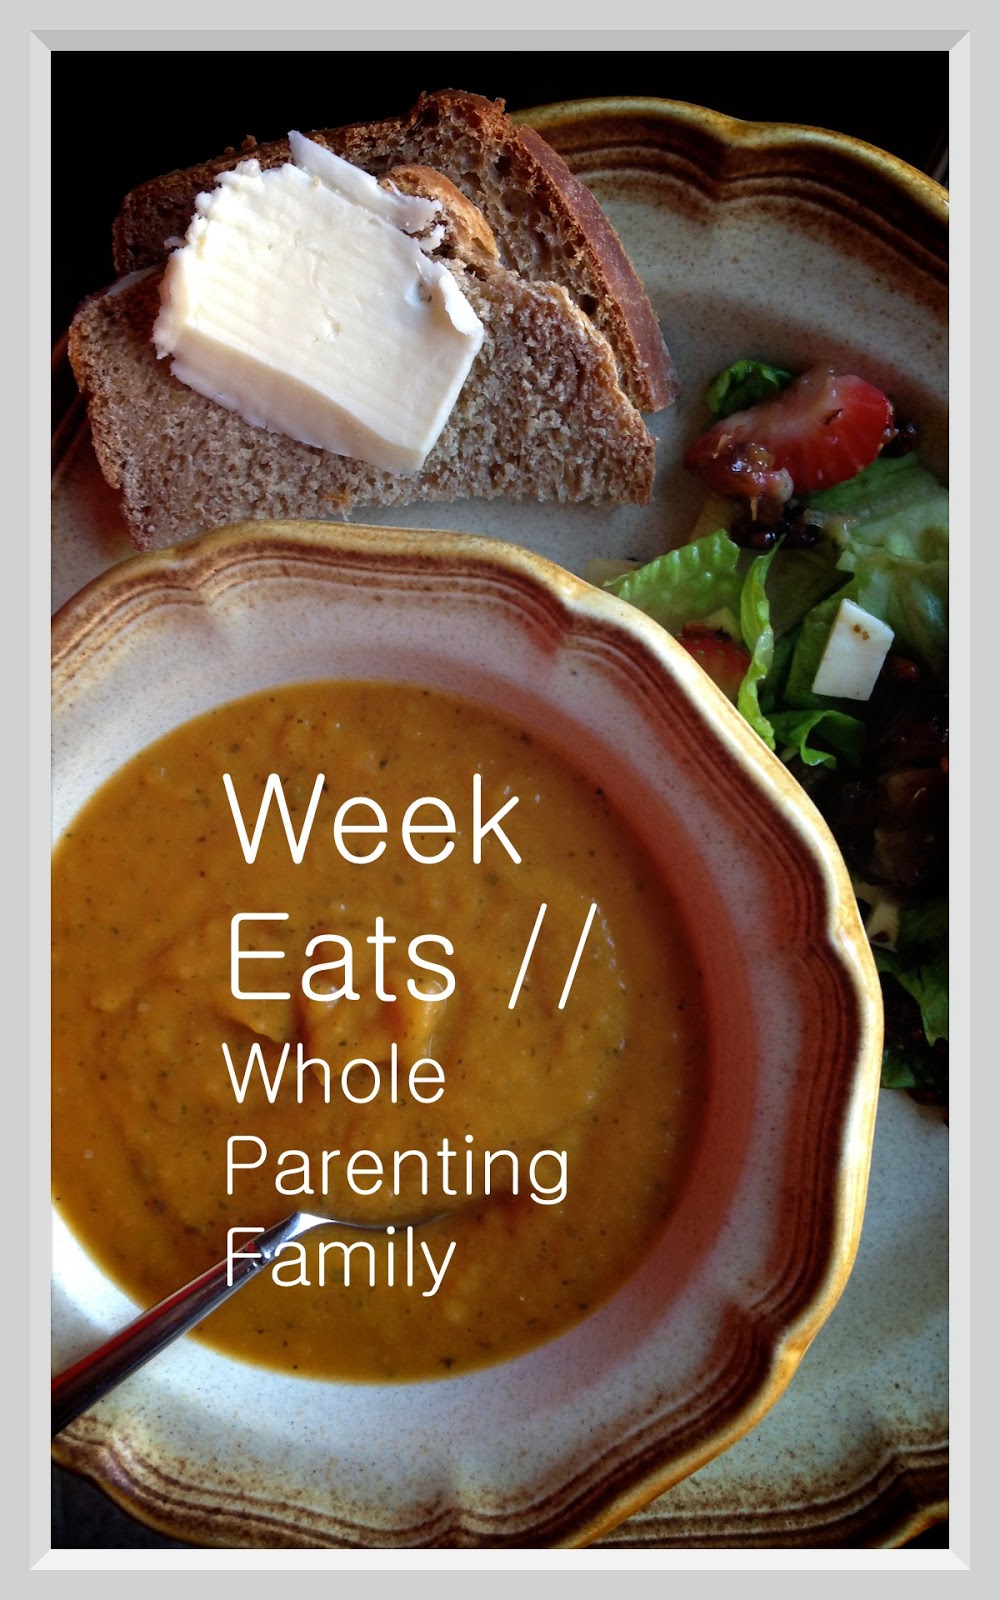 http://www.wholeparentingfamily.com/2014/10/25/week-eats-saturday-linkup-comment-up-food-meal-planning/